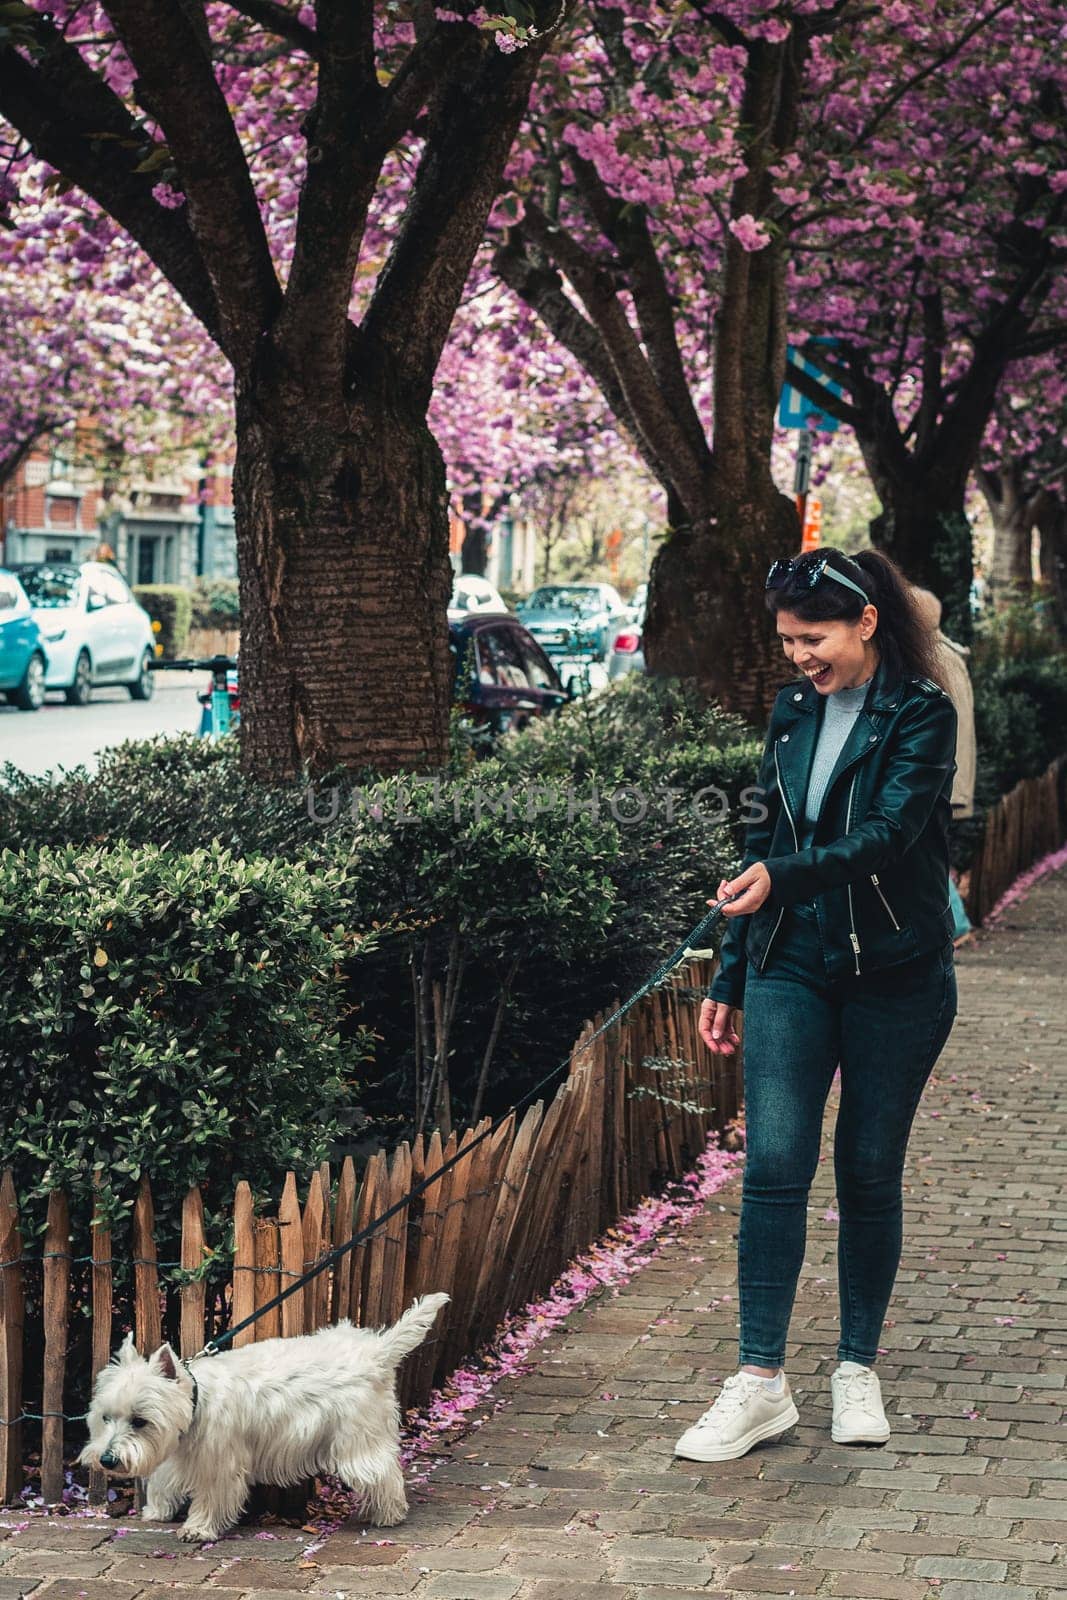 Portrait of one young beautiful caucasian girl in a leather jacket with a smile walks and has fun with a white dog on a leash on a city street against the backdrop of flowering sakura trees, close-up side view.